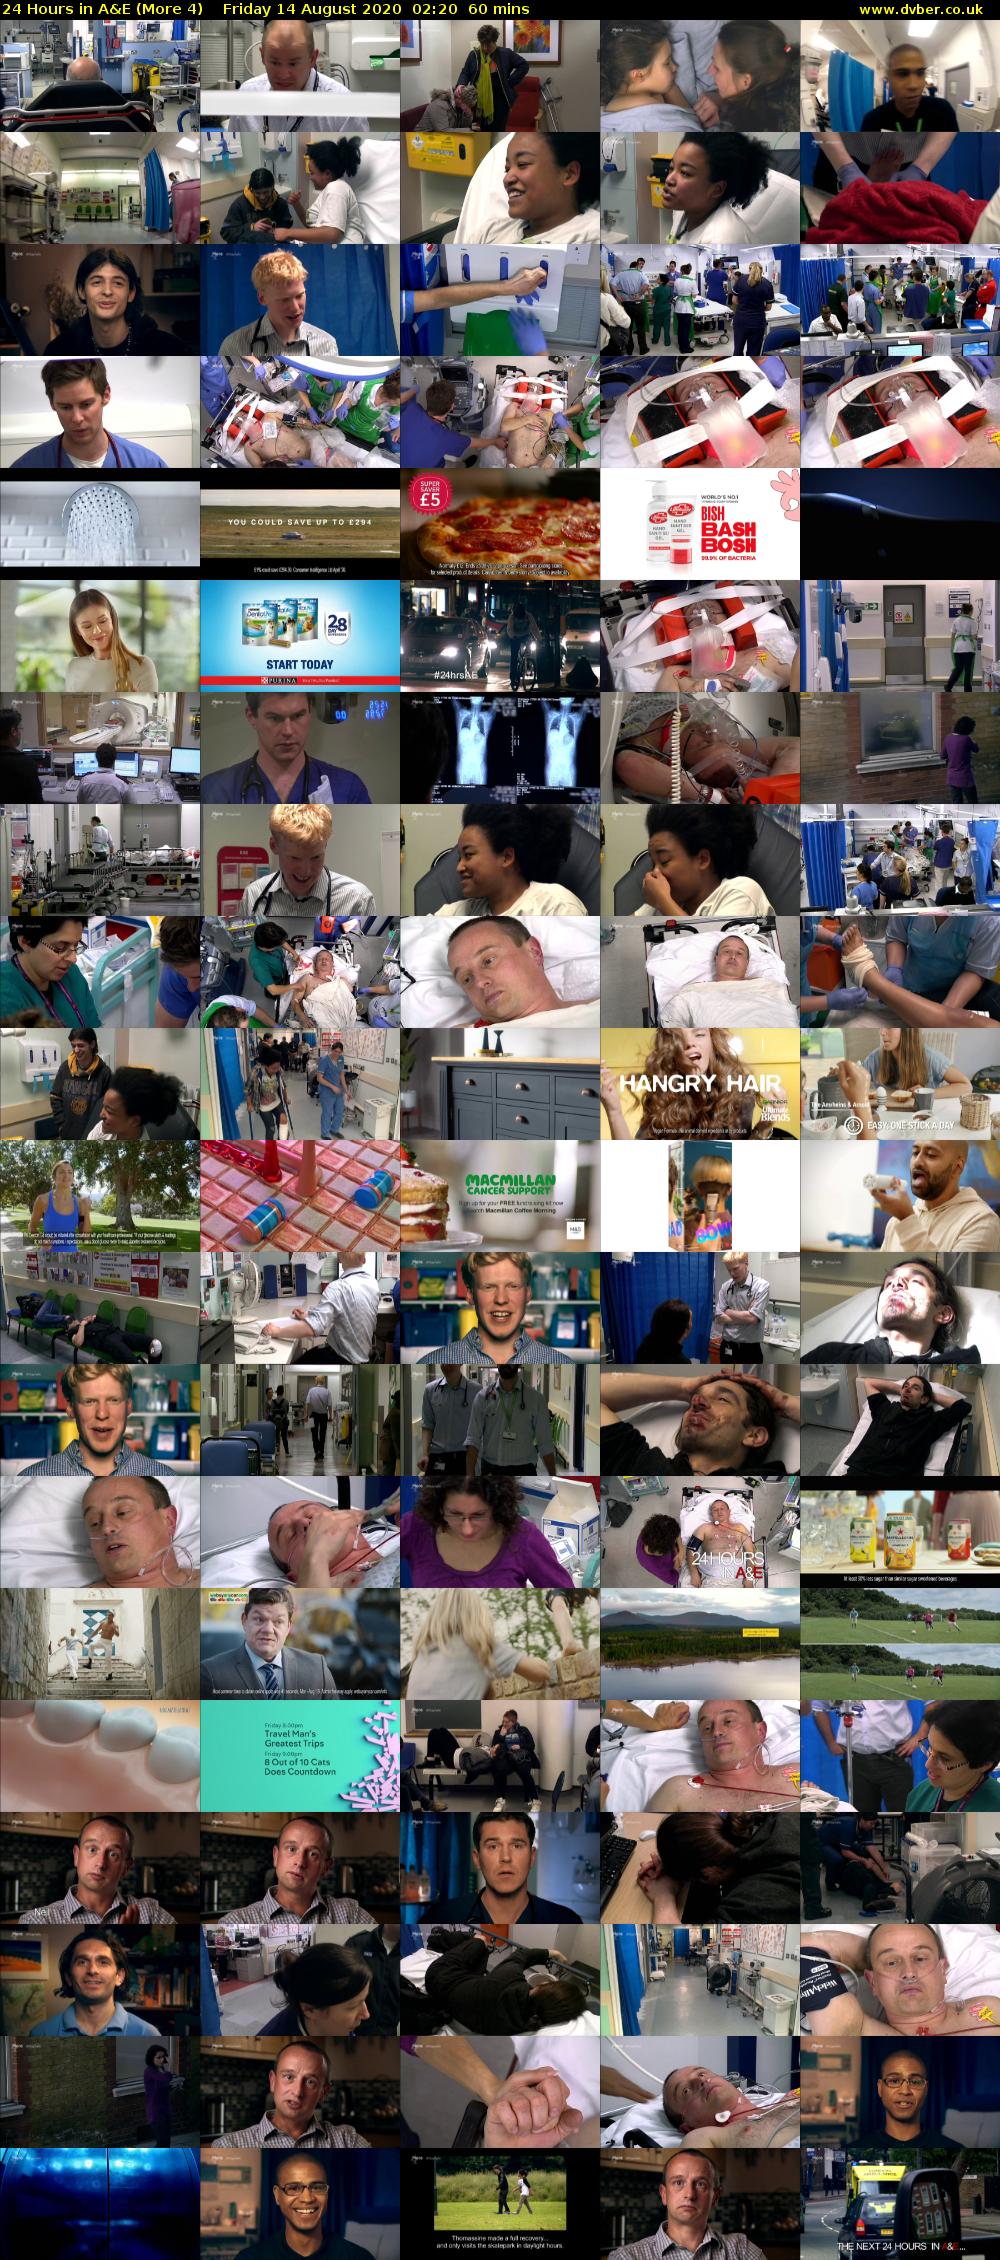 24 Hours in A&E (More 4) Friday 14 August 2020 02:20 - 03:20